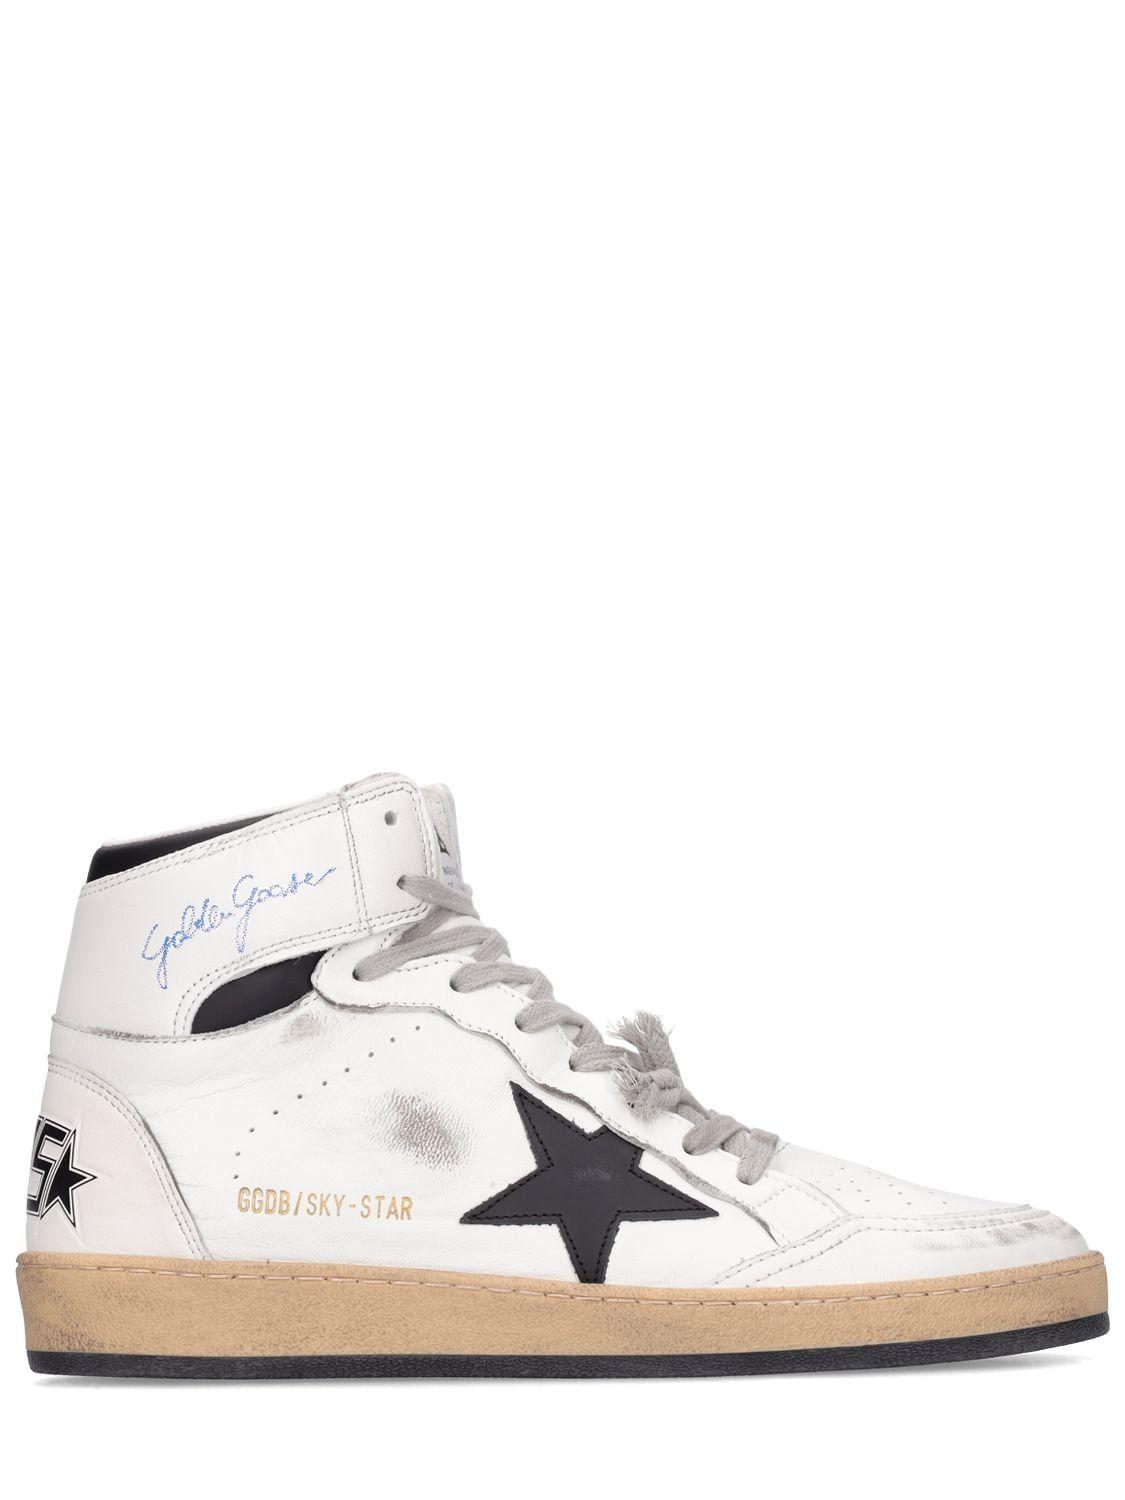 Golden Goose 20mm Sky Star Nappa Leather Sneakers in White | Lyst